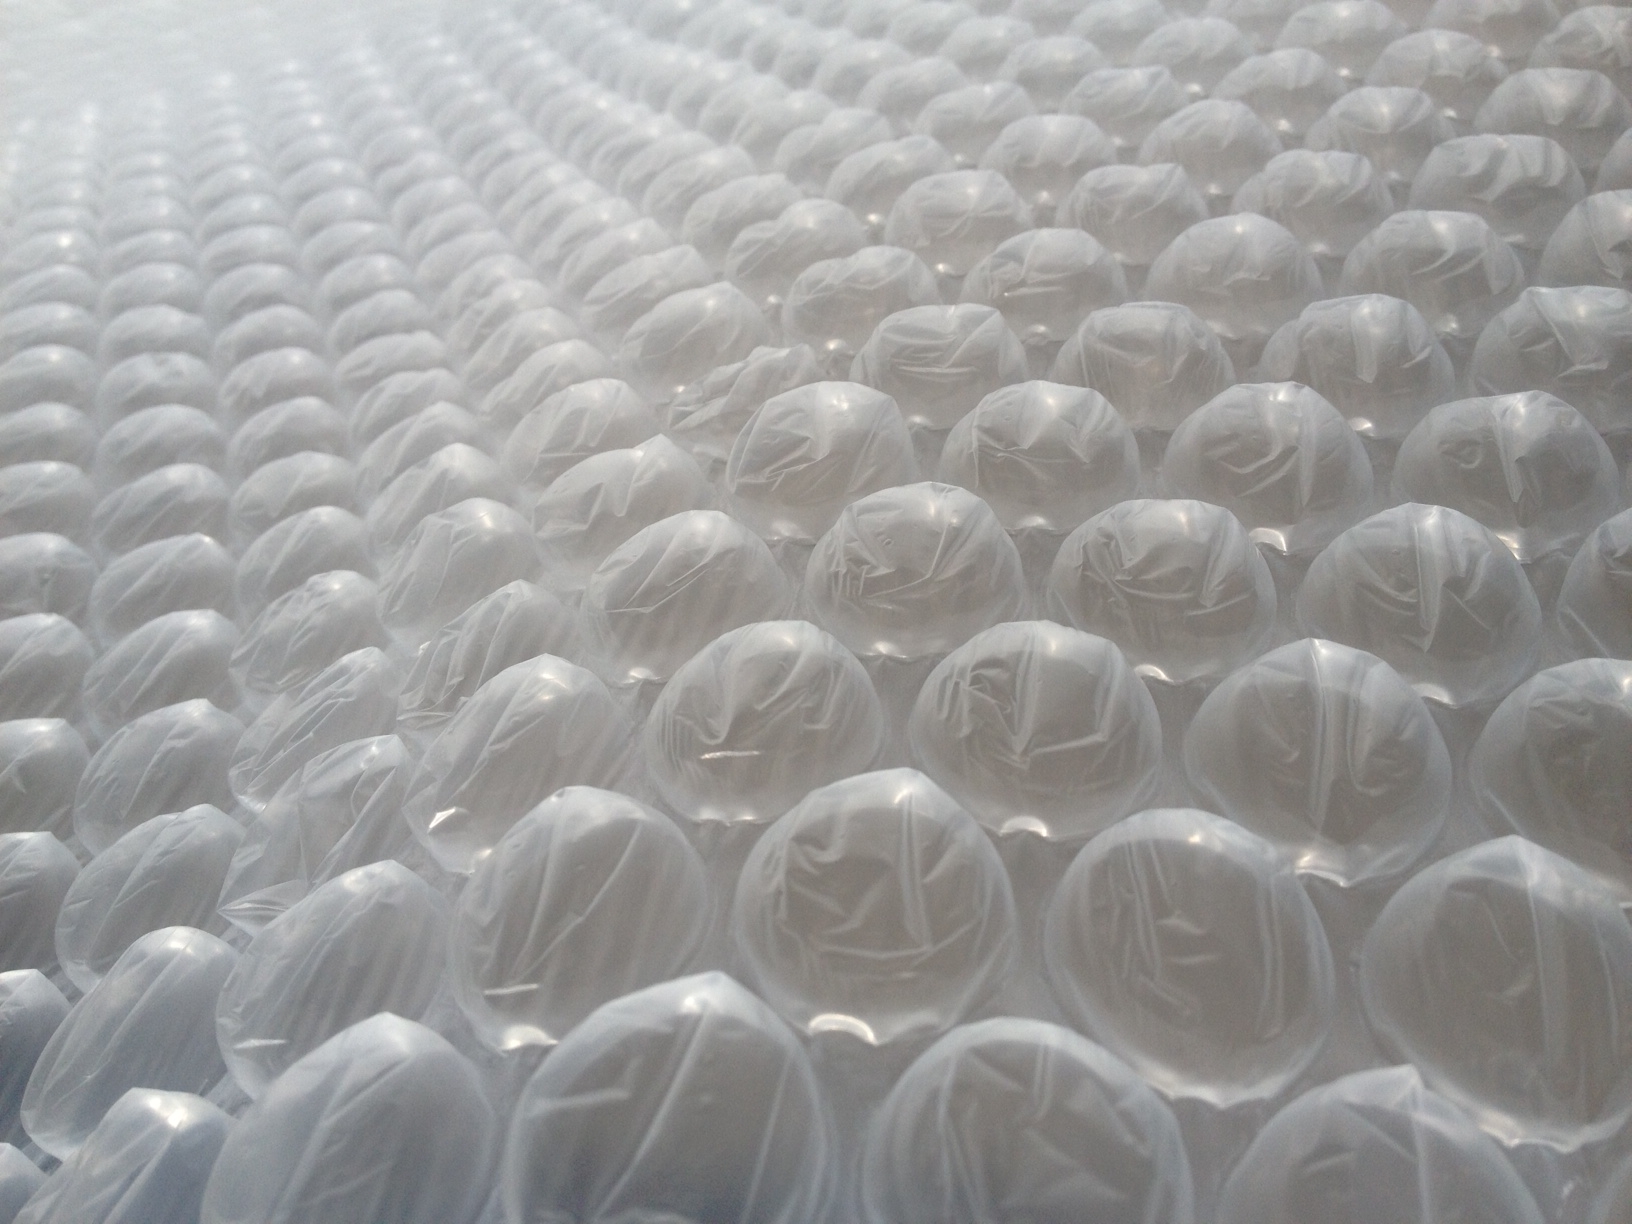 Sealed Air releases video on how Bubble Wrap is made Make: